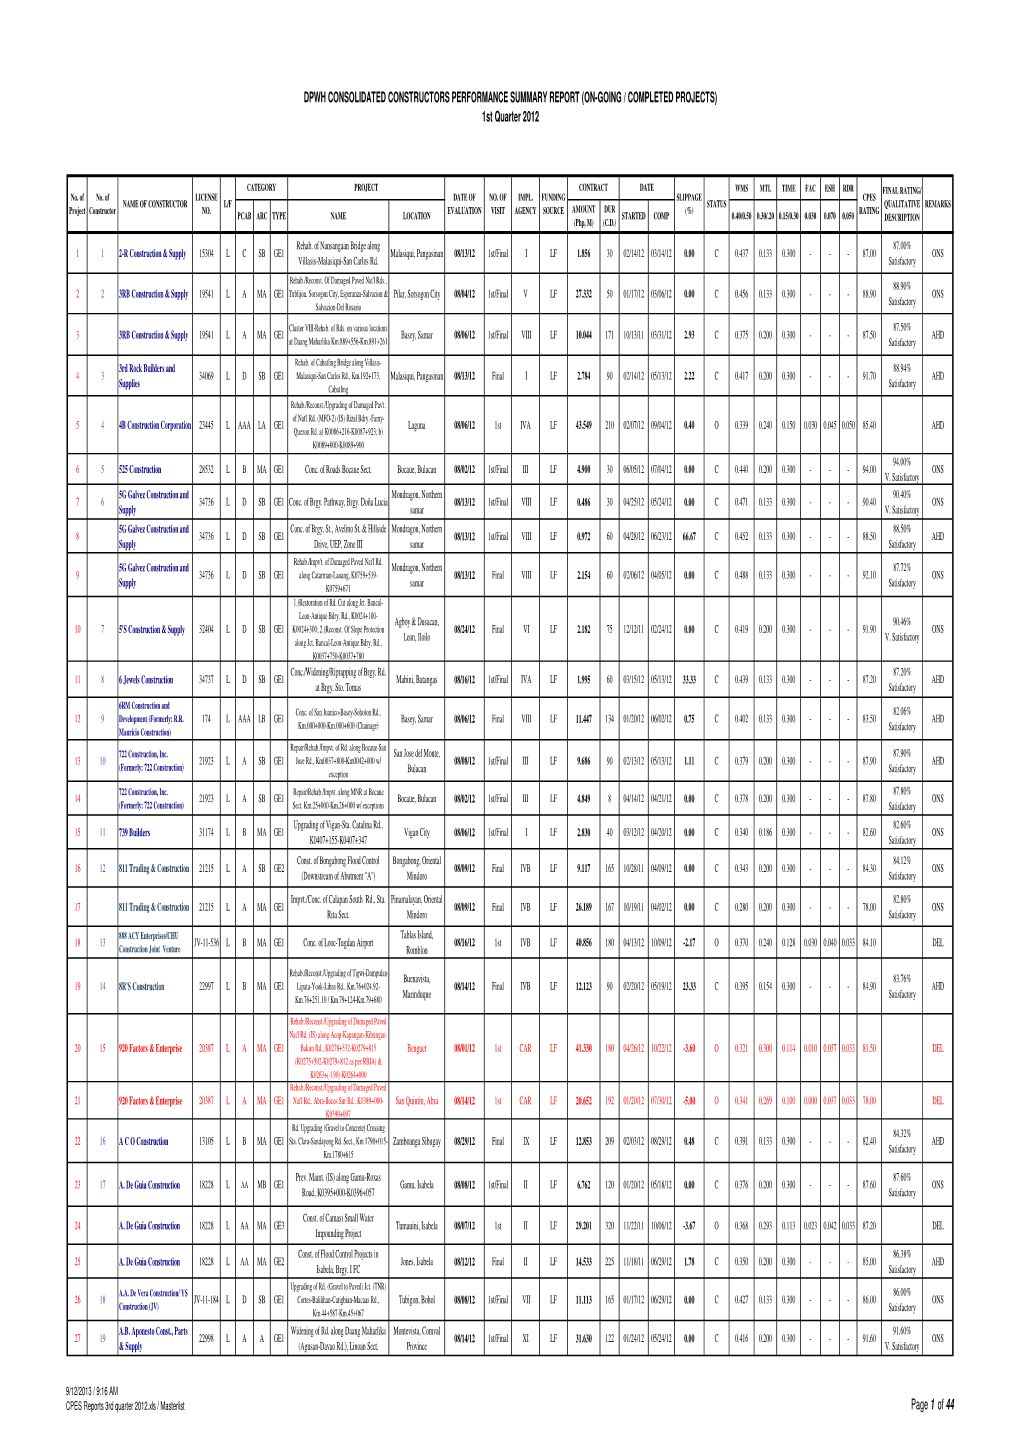 3Rd Quarter 2012.Xls / Masterlist Page 1 of 44 DPWH CONSOLIDATED CONSTRUCTORS PERFORMANCE SUMMARY REPORT (ON-GOING / COMPLETED PROJECTS) 1St Quarter 2012